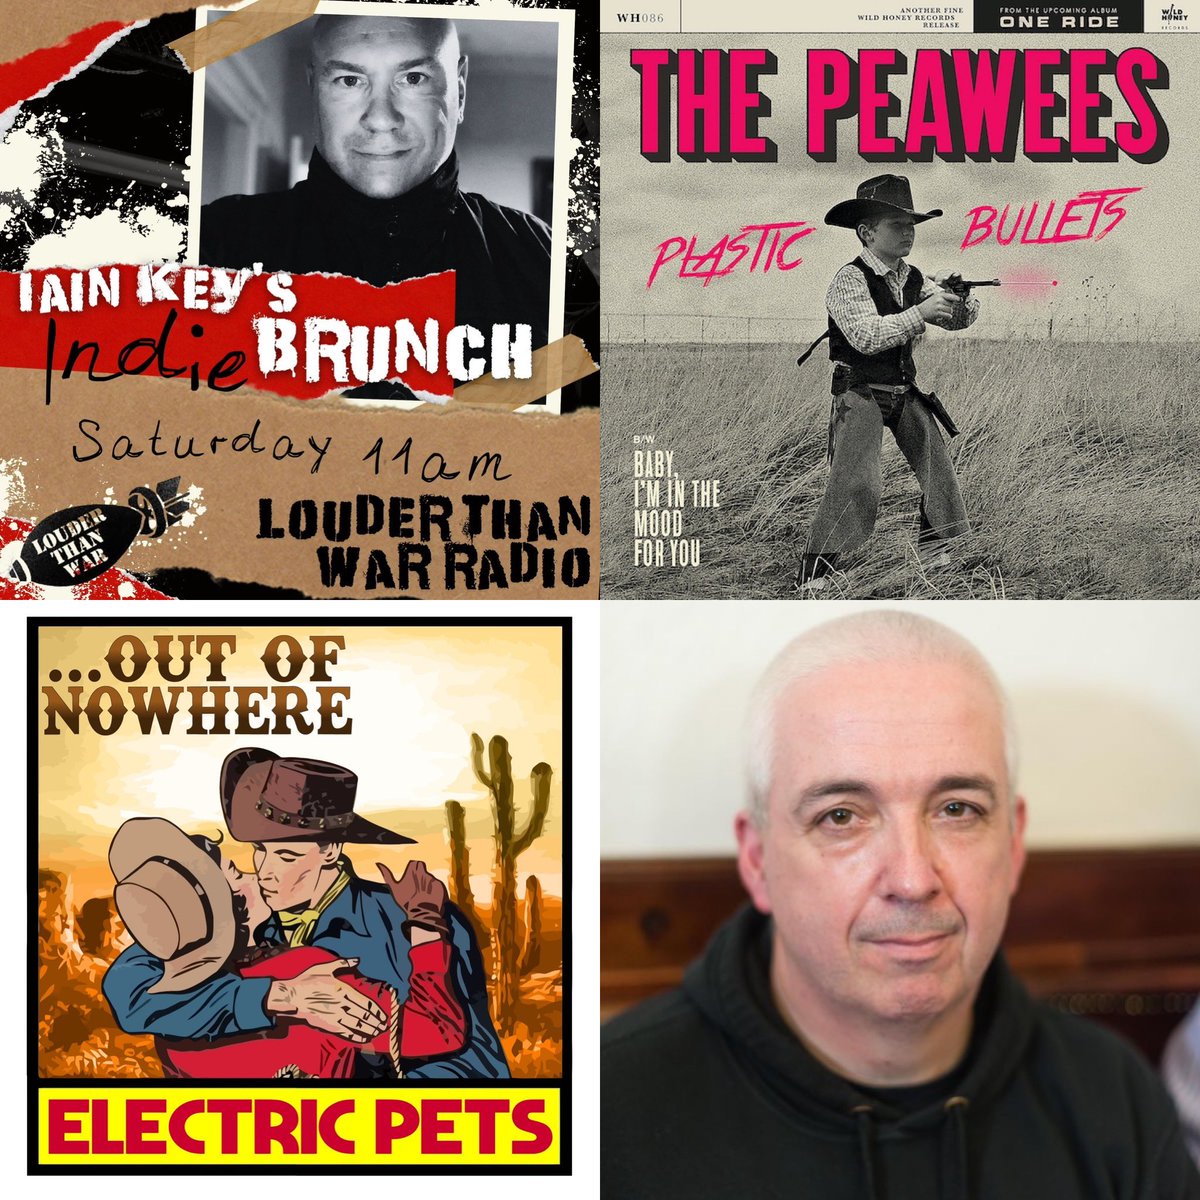 As well as @BPete1970 picking some great tunes for my Indie Brunch this weekend on @louderthanwar I'll be playing new/recent singles from @PetsElectric @crumbsband @7ebra_ #thewendydarlings and #thepeawees